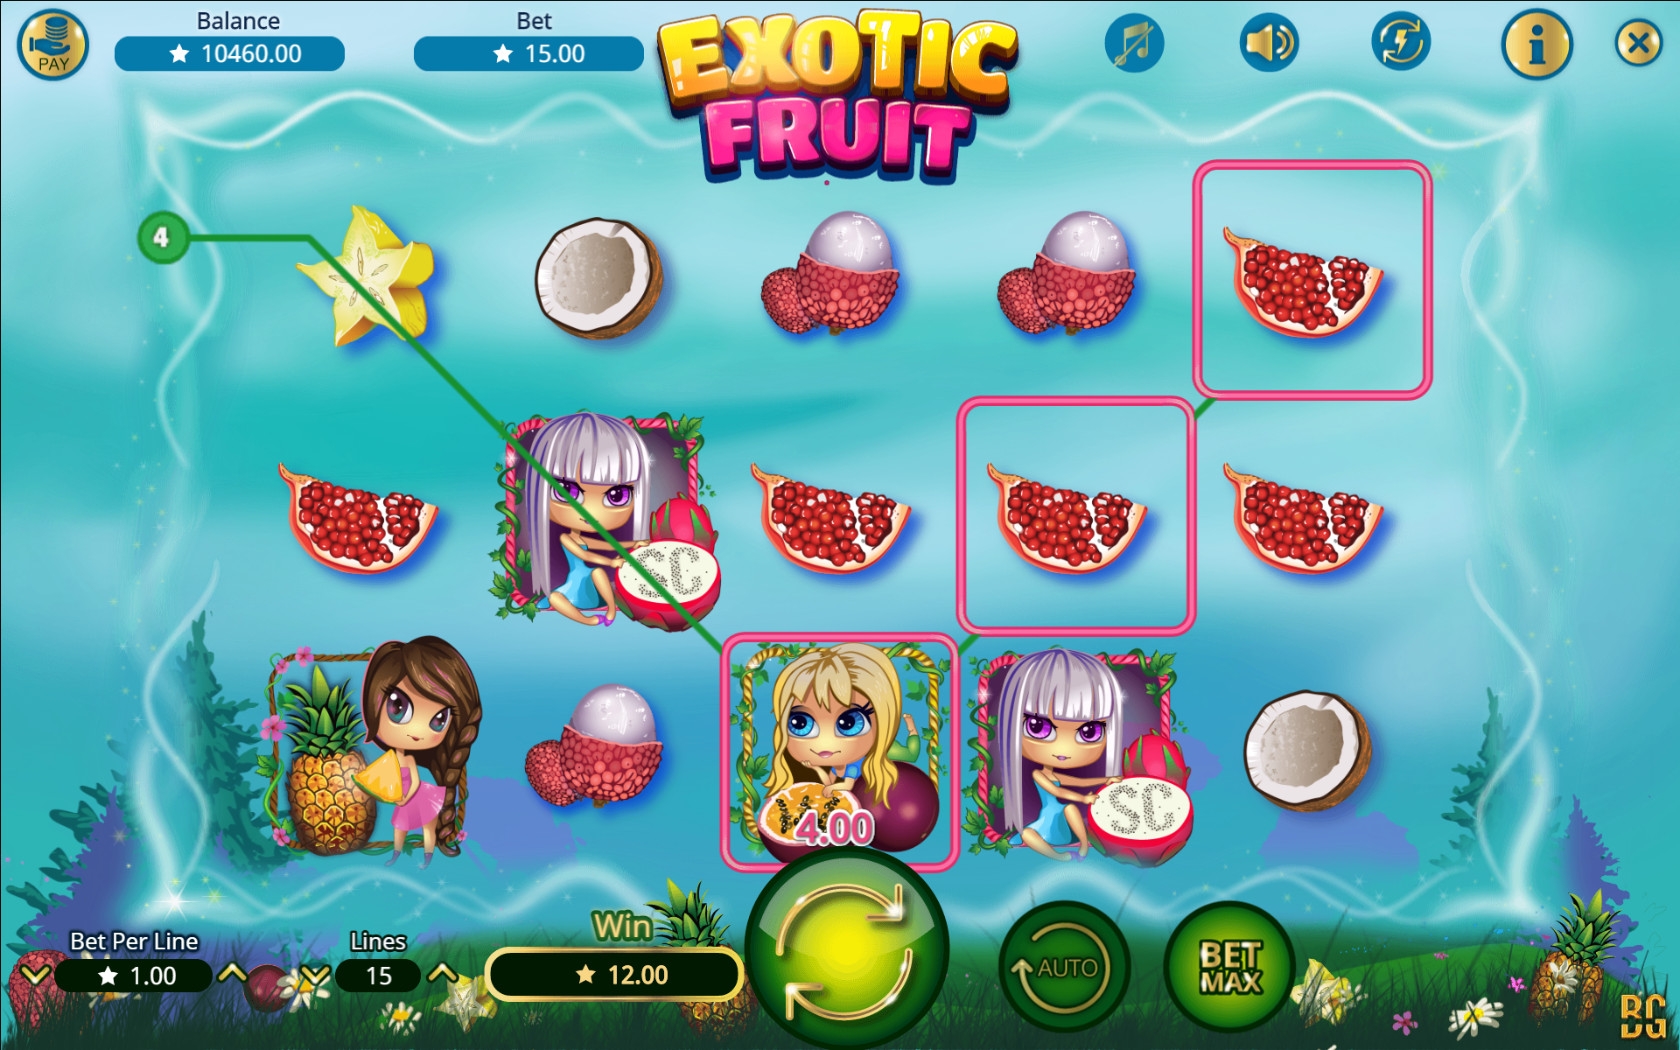 Exotic Fruit (Exotic Fruit) from category Slots